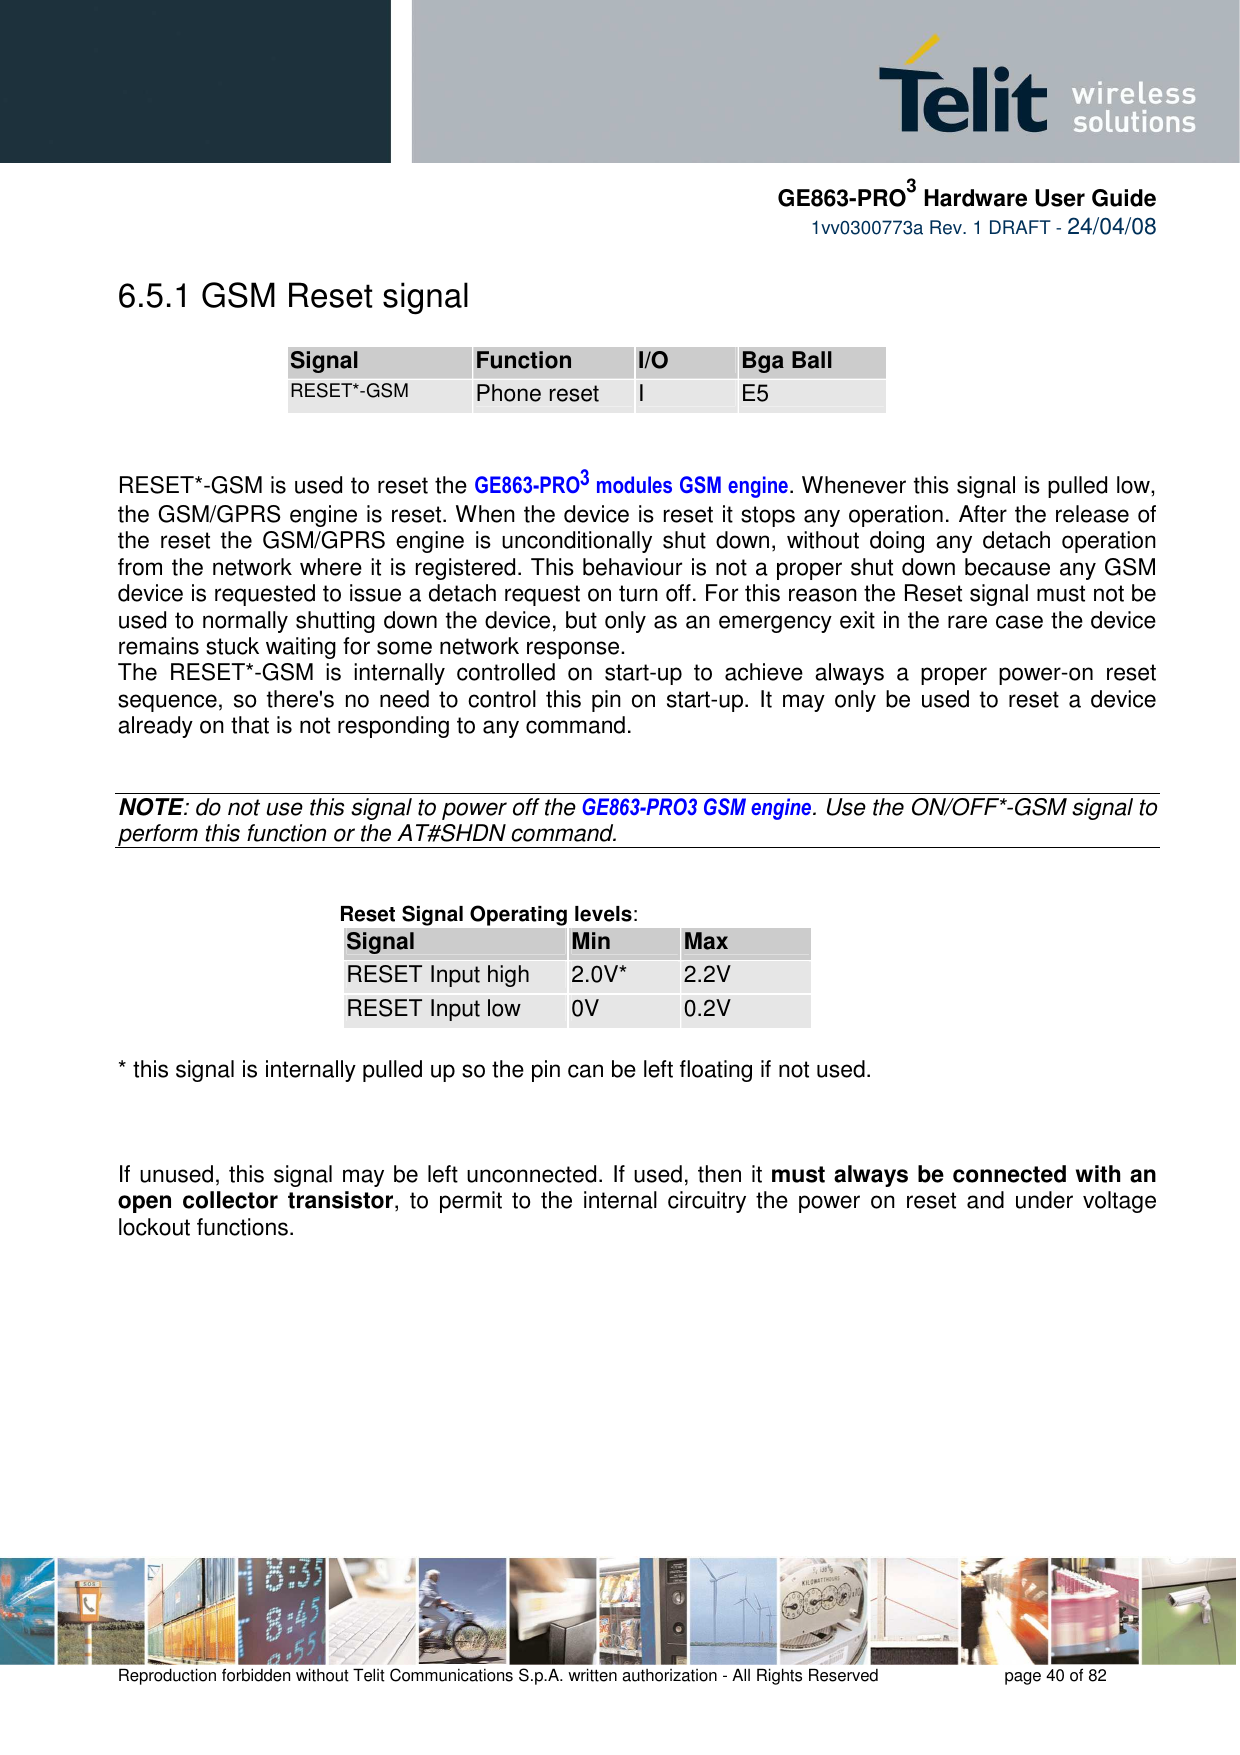     GE863-PRO3 Hardware User Guide  1vv0300773a Rev. 1 DRAFT - 24/04/08    Reproduction forbidden without Telit Communications S.p.A. written authorization - All Rights Reserved    page 40 of 82  6.5.1 GSM Reset signal  Signal  Function  I/O  Bga Ball RESET*-GSM Phone reset  I  E5   RESET*-GSM is used to reset the GE863-PRO3 modules GSM engine. Whenever this signal is pulled low, the GSM/GPRS engine is reset. When the device is reset it stops any operation. After the release of the  reset the GSM/GPRS  engine is  unconditionally  shut  down,  without  doing  any  detach  operation from the network where it is registered. This behaviour is not a proper shut down because any GSM device is requested to issue a detach request on turn off. For this reason the Reset signal must not be used to normally shutting down the device, but only as an emergency exit in the rare case the device remains stuck waiting for some network response. The  RESET*-GSM  is  internally  controlled  on  start-up  to  achieve  always  a  proper  power-on  reset sequence, so there&apos;s no  need to control this pin on start-up. It may only be used to reset a device already on that is not responding to any command.   NOTE: do not use this signal to power off the GE863-PRO3 GSM engine. Use the ON/OFF*-GSM signal to perform this function or the AT#SHDN command.   Reset Signal Operating levels: Signal  Min  Max RESET Input high  2.0V*  2.2V RESET Input low  0V  0.2V  * this signal is internally pulled up so the pin can be left floating if not used.    If unused, this signal may be left unconnected. If used, then it must always be connected with an open collector transistor, to permit to the  internal circuitry the power  on reset and under  voltage lockout functions.        